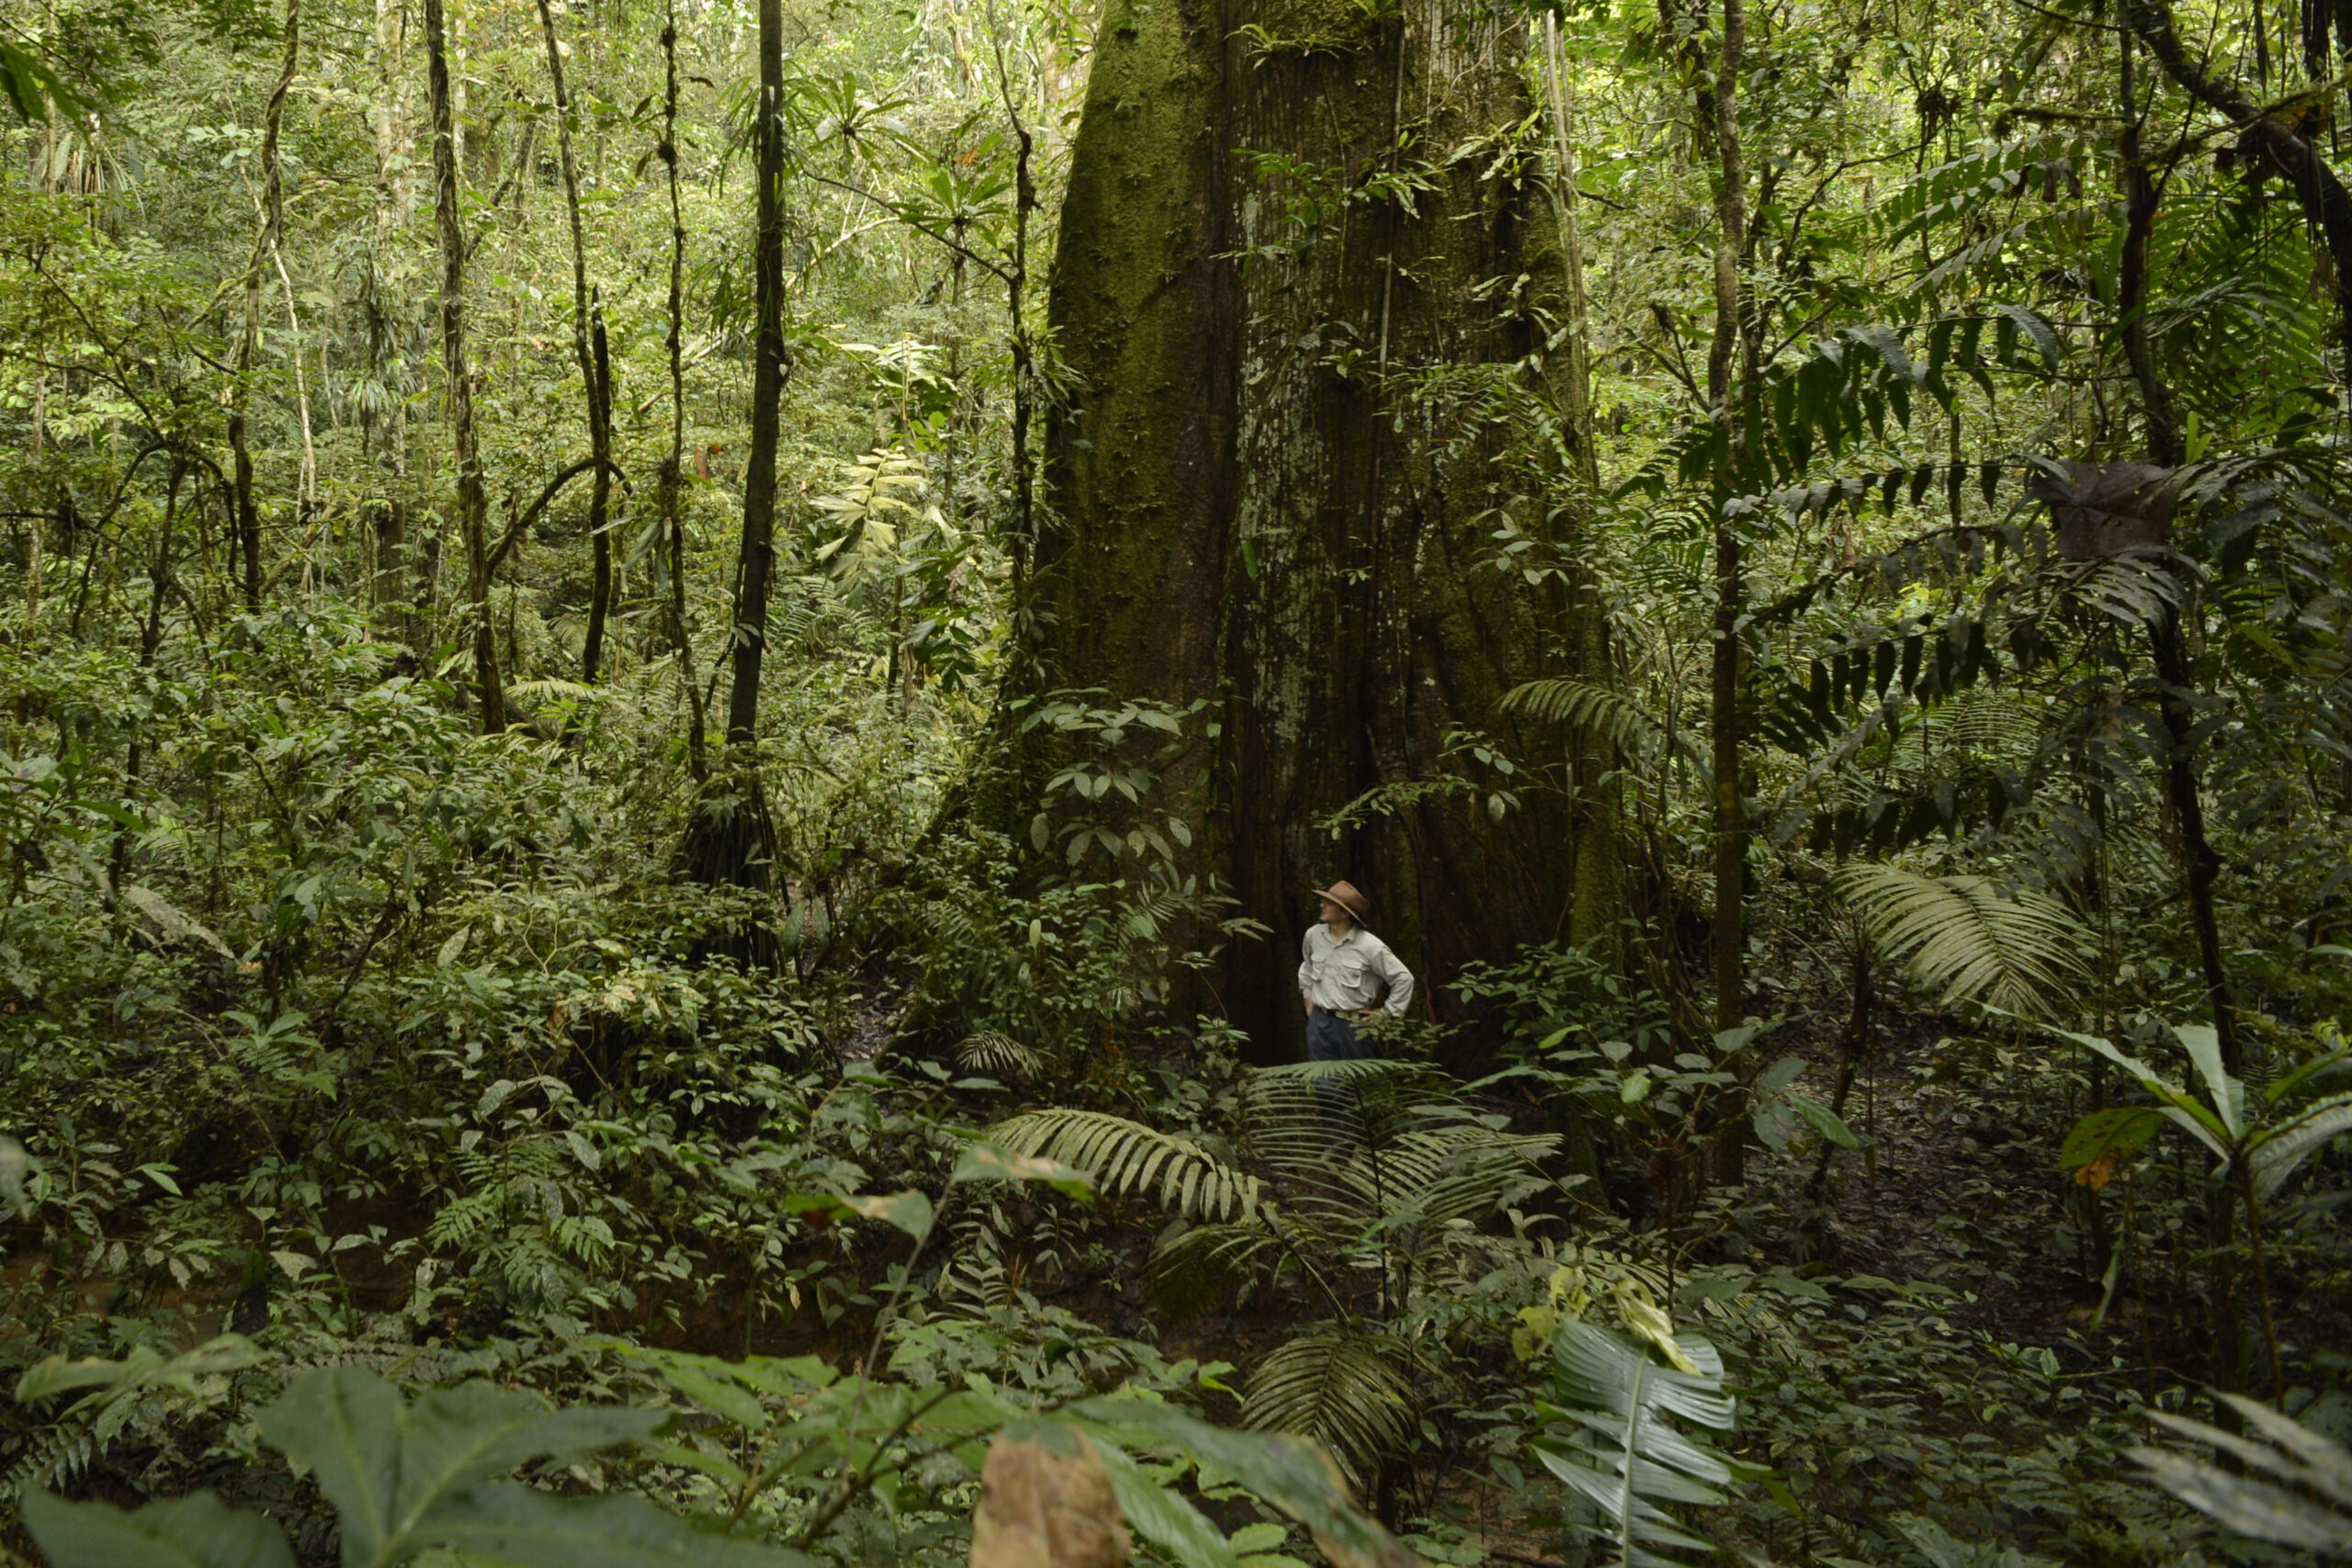 A person stands at the base of a tree in a tropical forest.